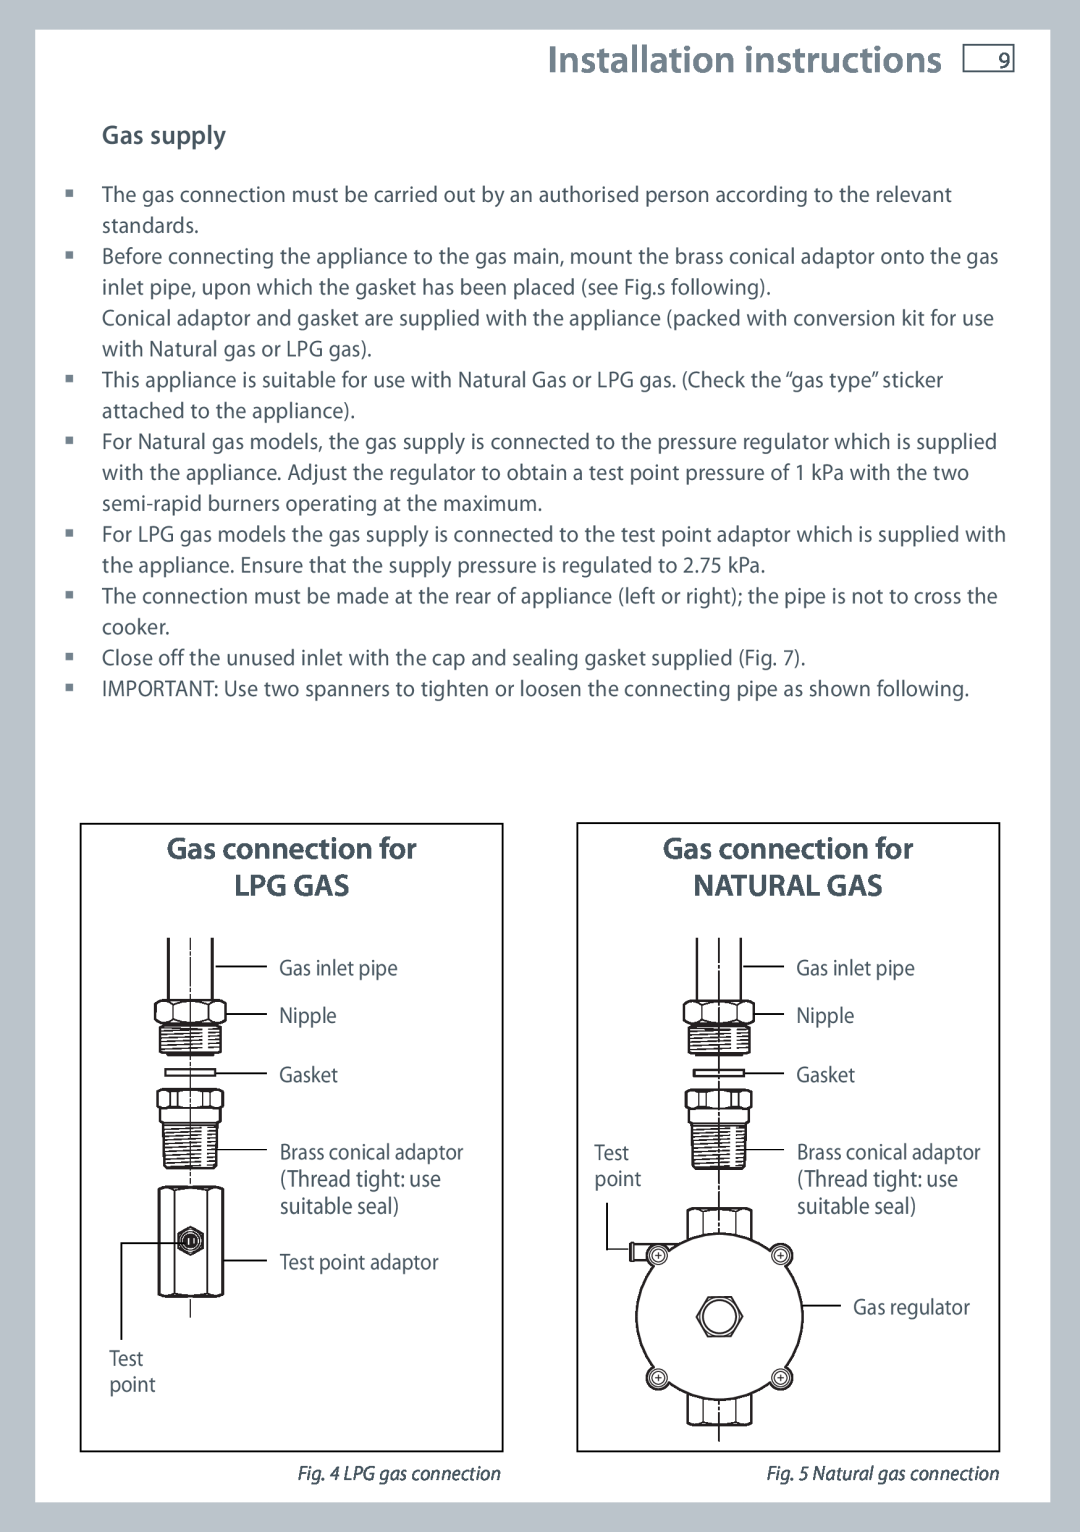 Fisher & Paykel 60 Gas supply, suitable seal, Installation instructions, Gas connection for LPG GAS, Natural Gas 